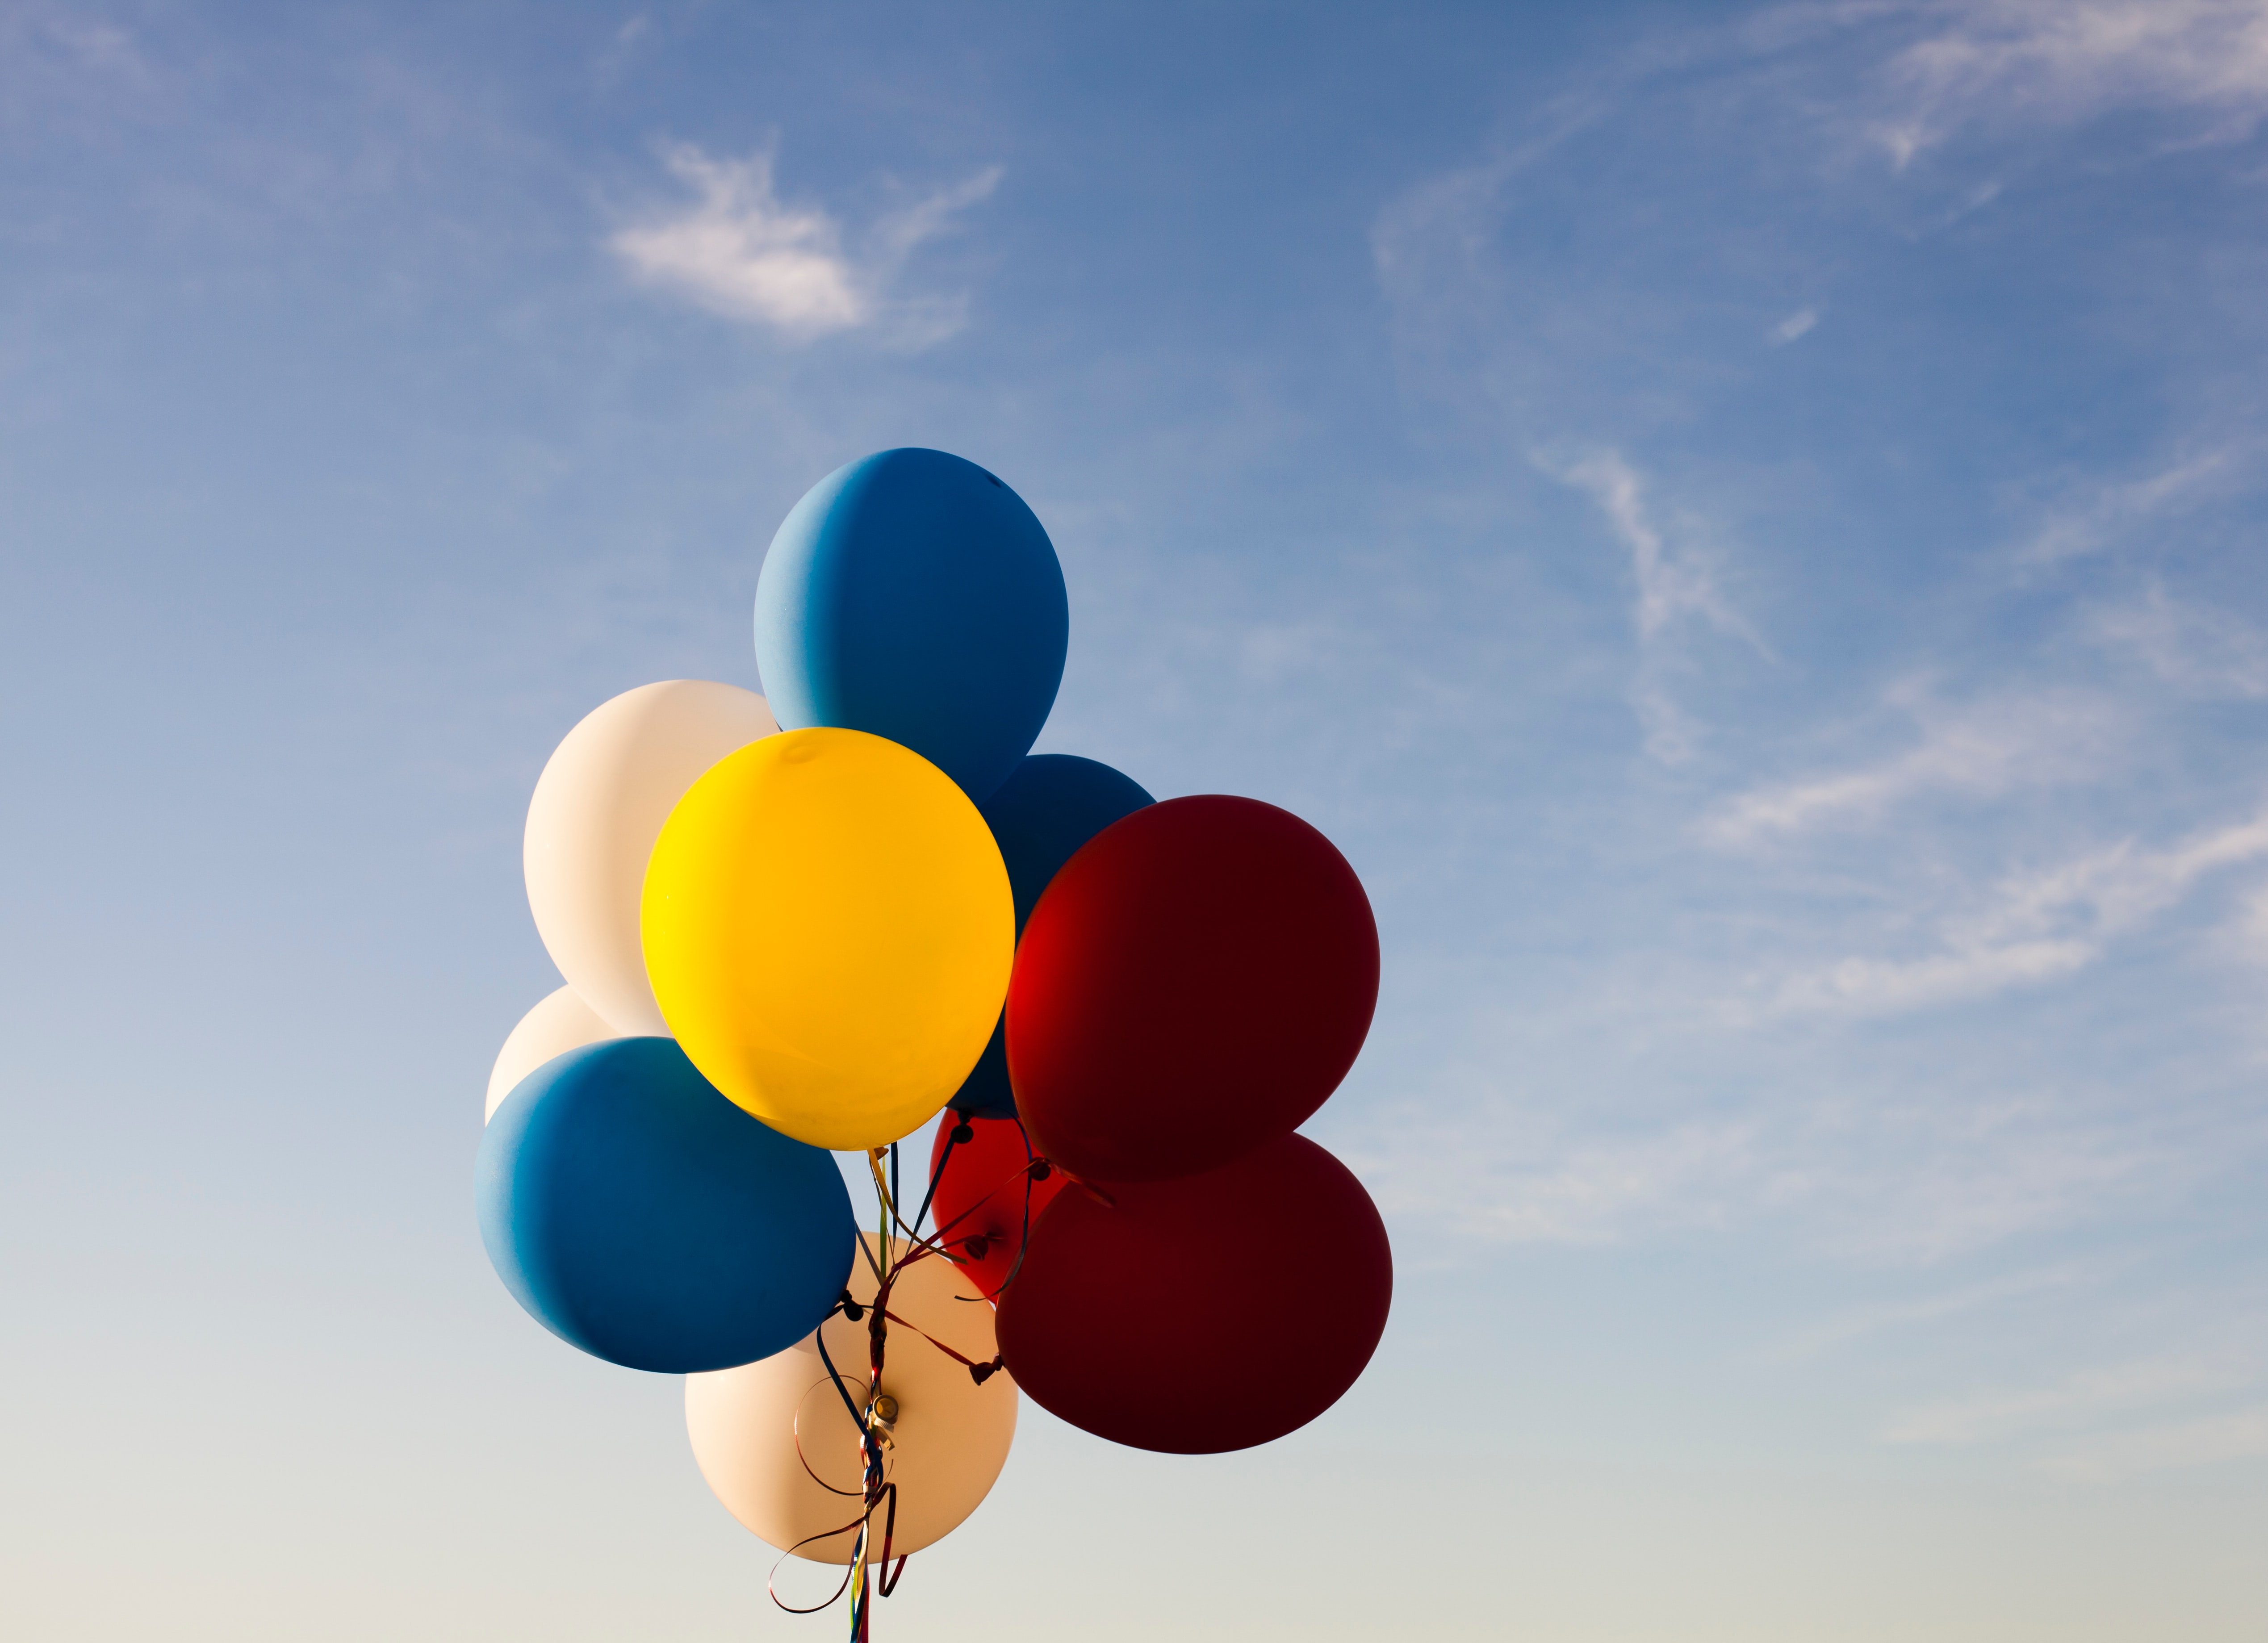 Balloons are often made of plastic, which poses serious environmental concerns - so SAD! Photo by Andreas Weiland on Unsplash